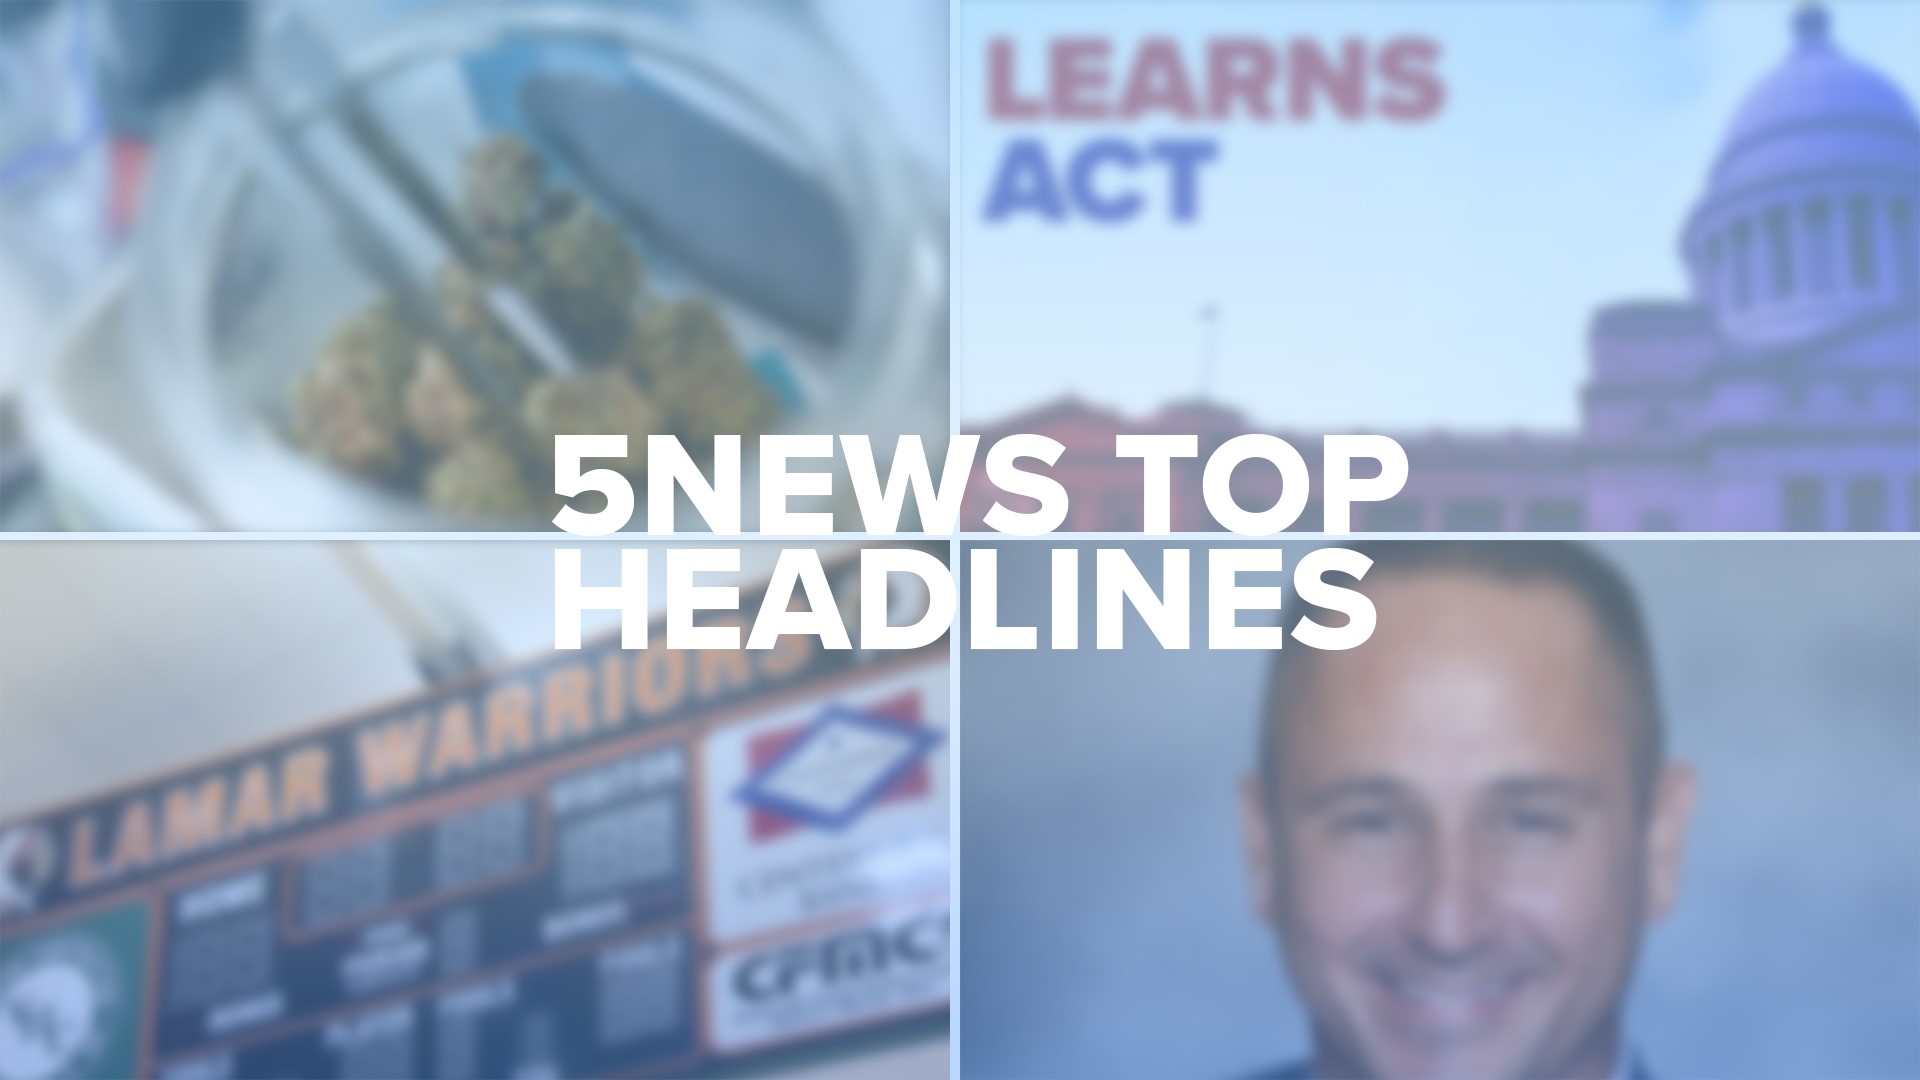 Take a look at this week's top headlines for local news across our area! 📰